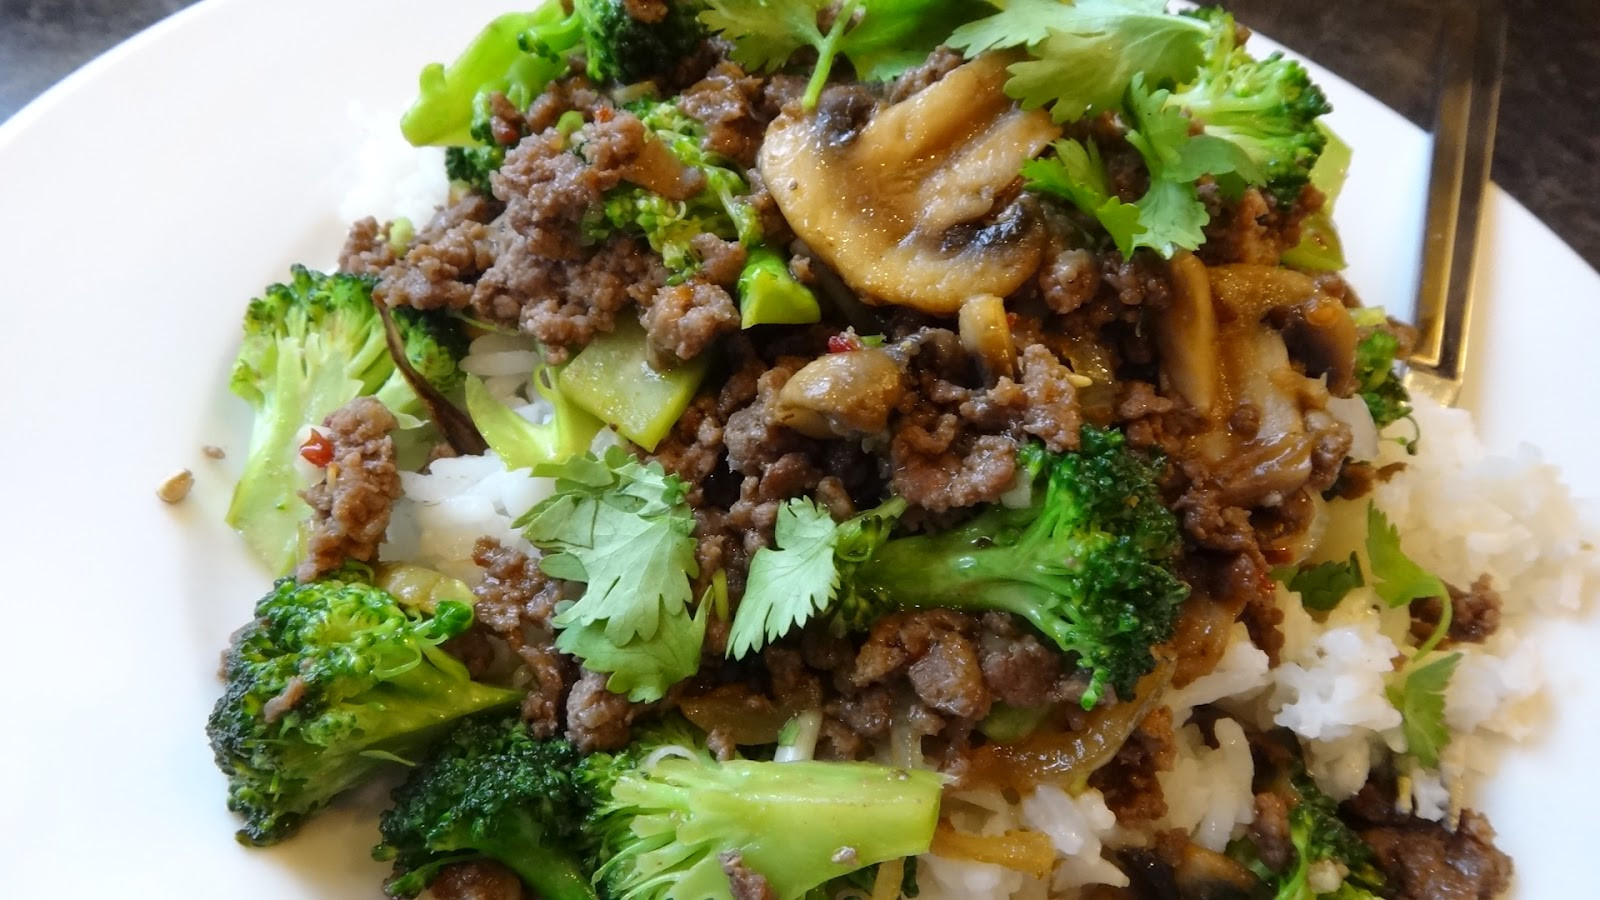 Ground Beef And Vegetable Stir Fry
 I want to cook that Beef and Broccoli Stir Fry